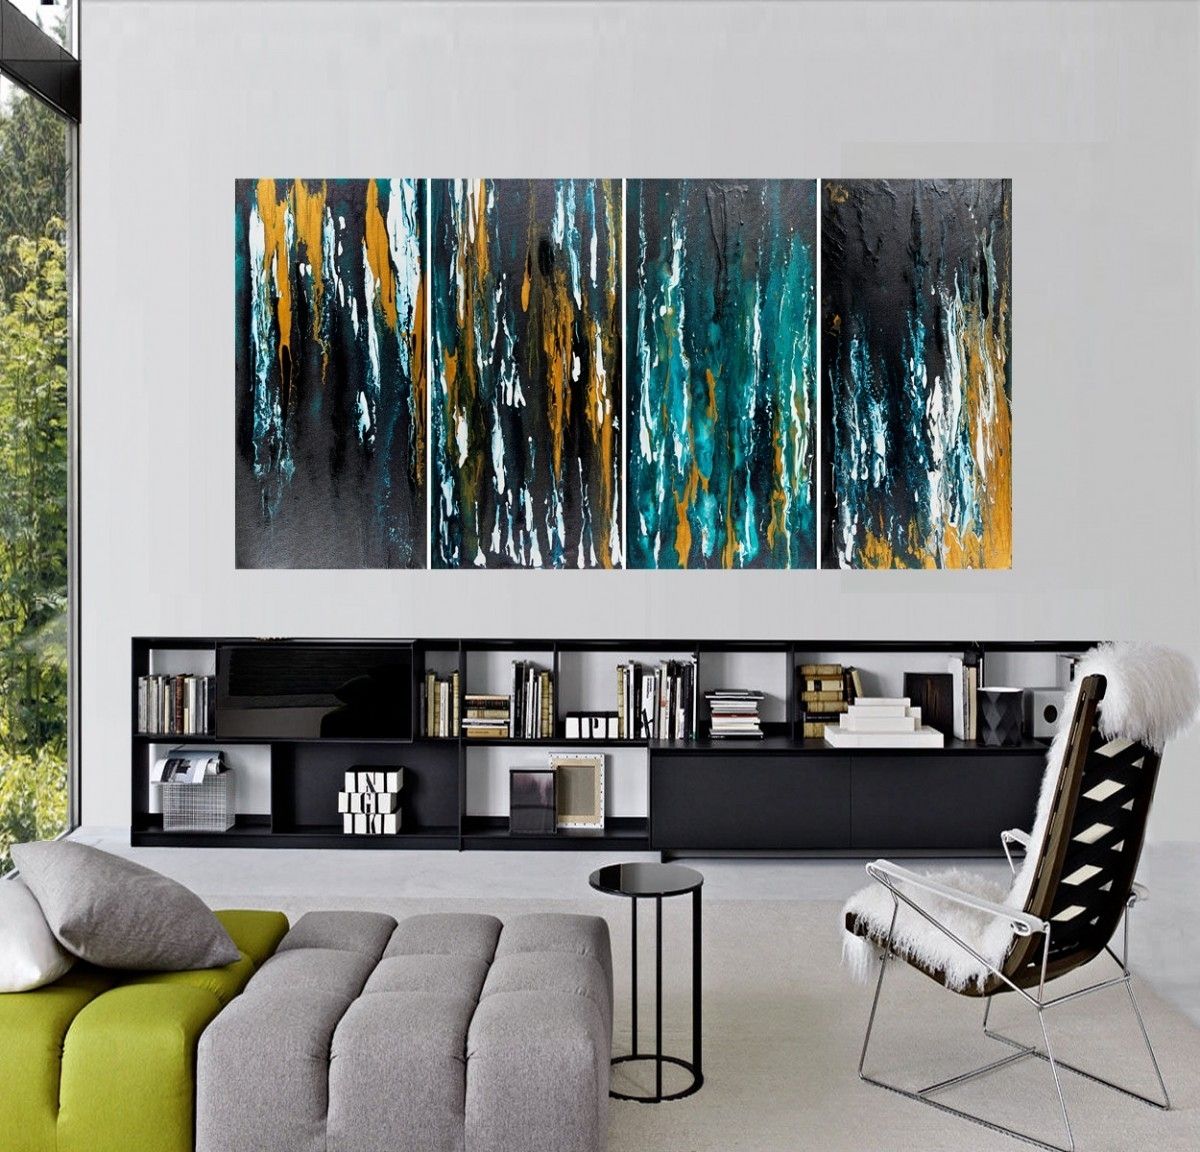 Meteor Shower Iiqiqigallery 48"x24" Original Modern Abstract With Regard To Black And Gold Wall Art (View 12 of 20)